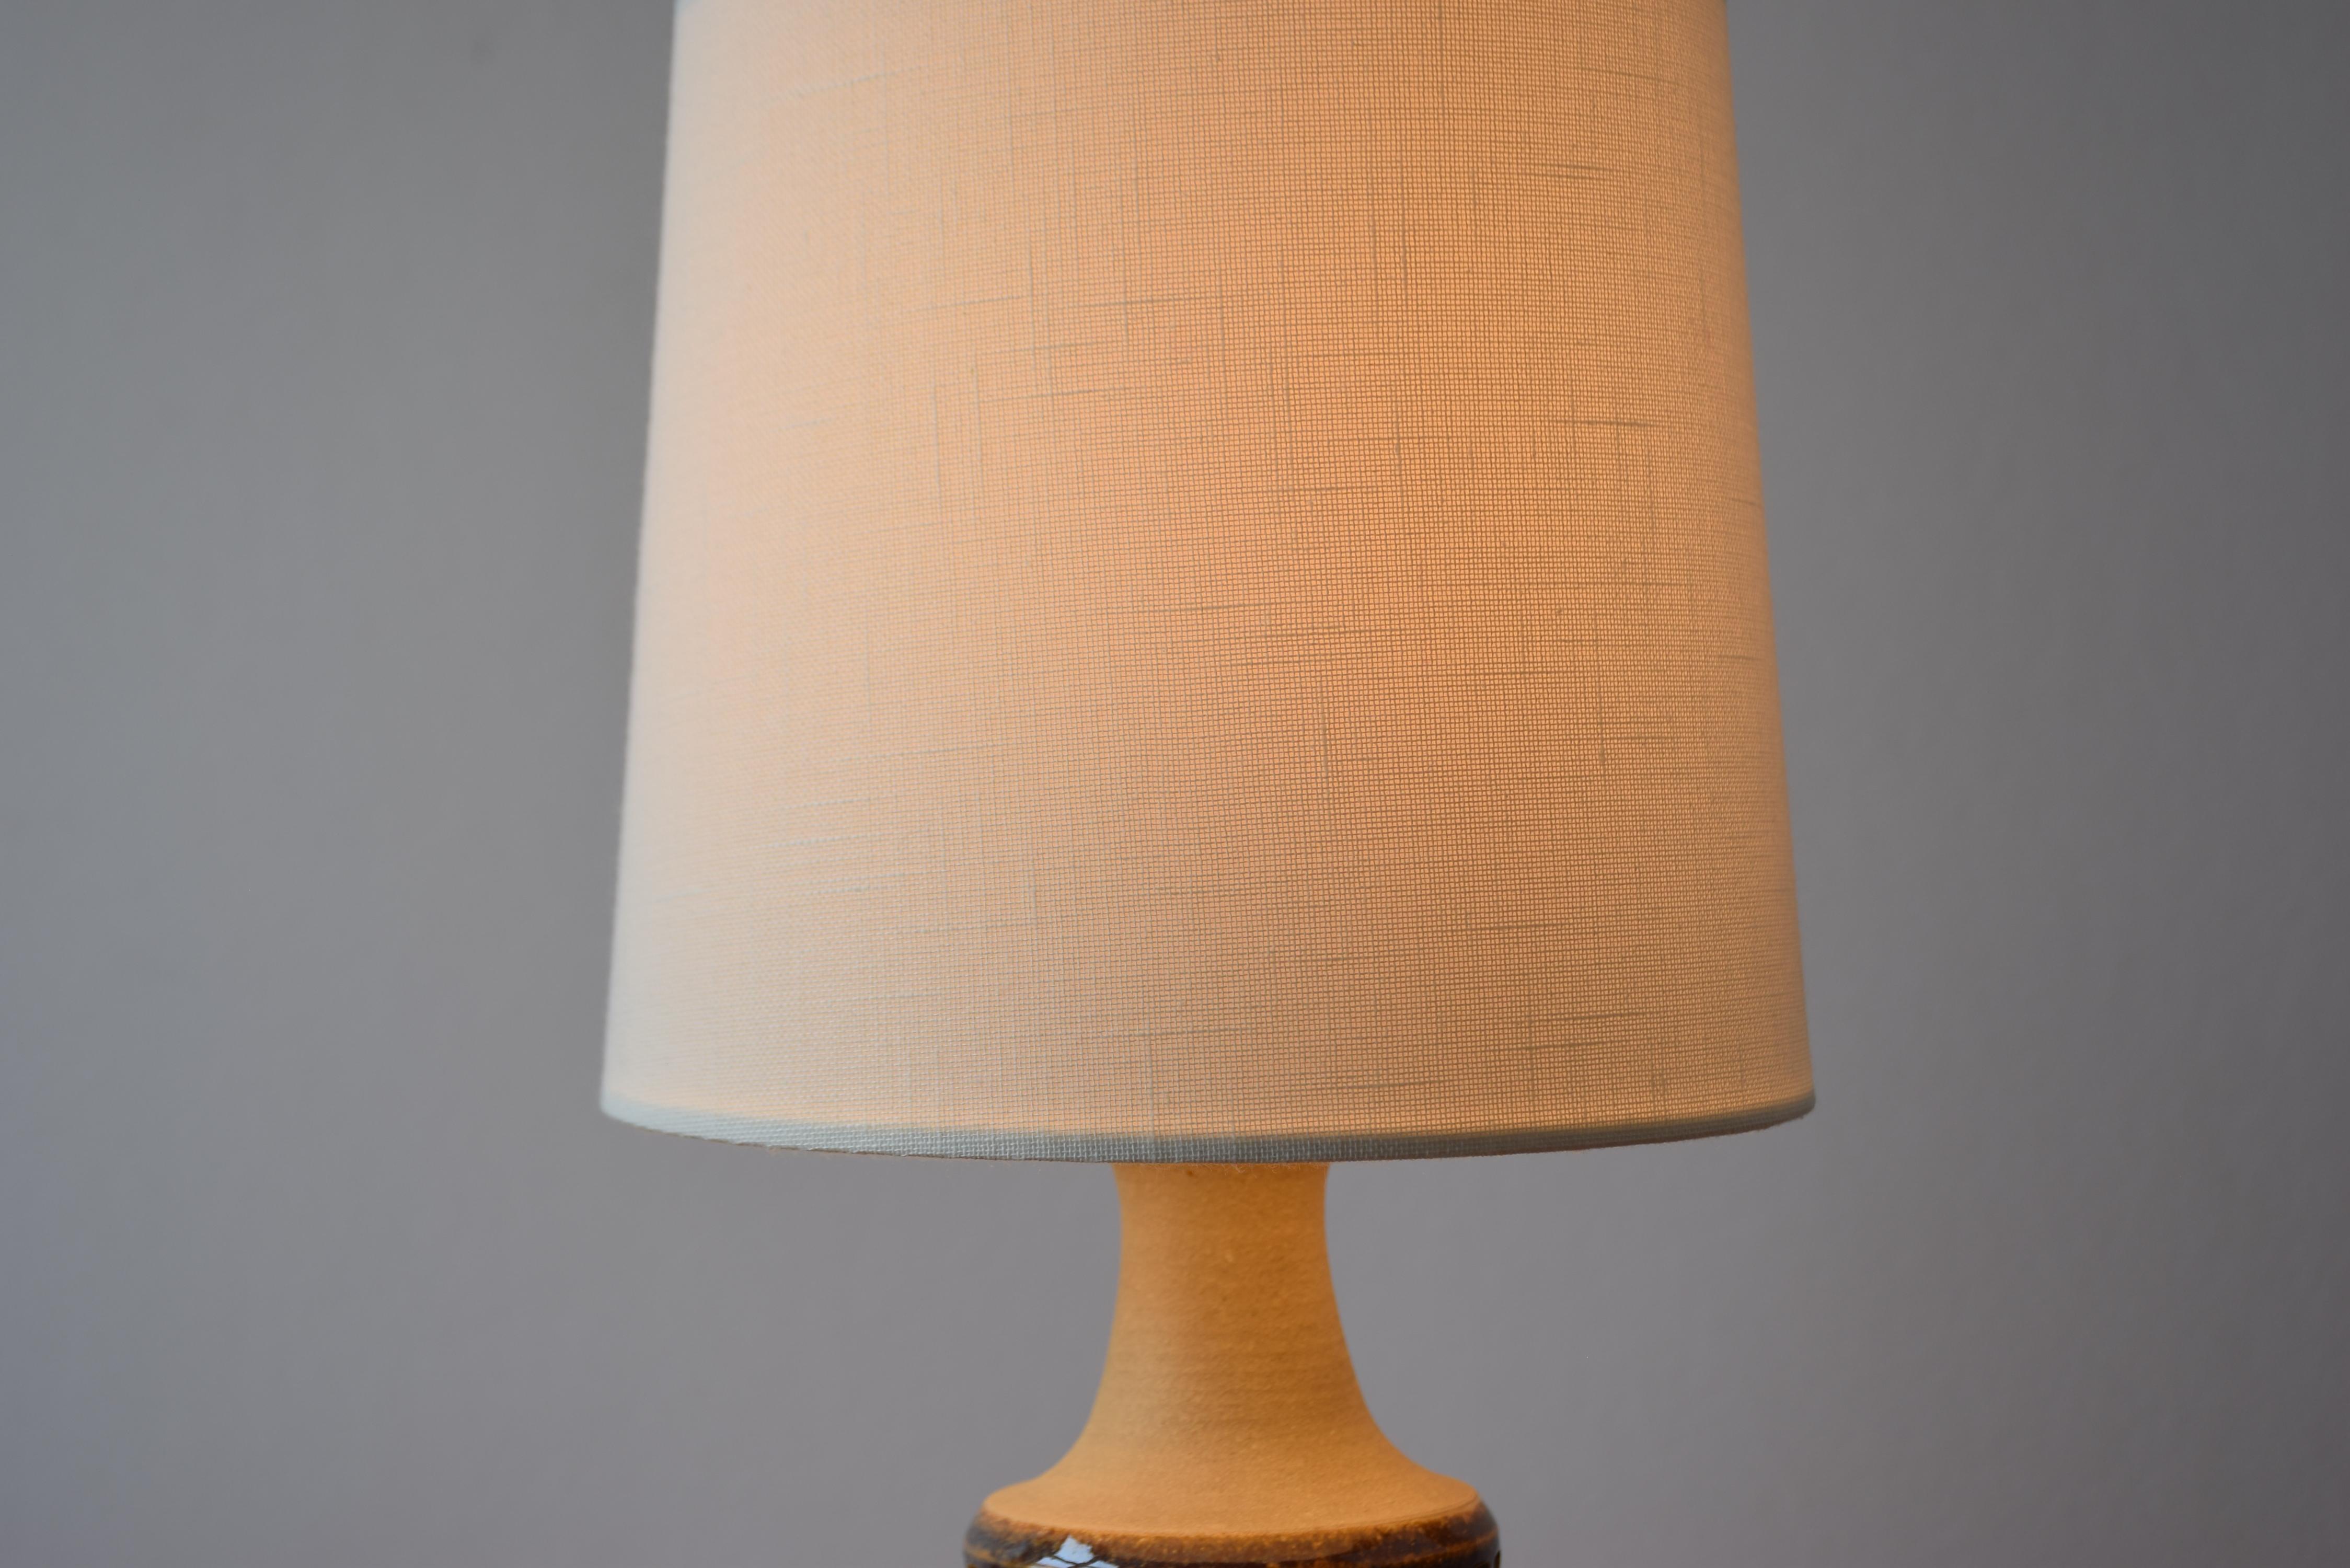 Danish Midcentury Søholm Small Ceramic Table Lamp Brown Blue Glaze, 1960s For Sale 2